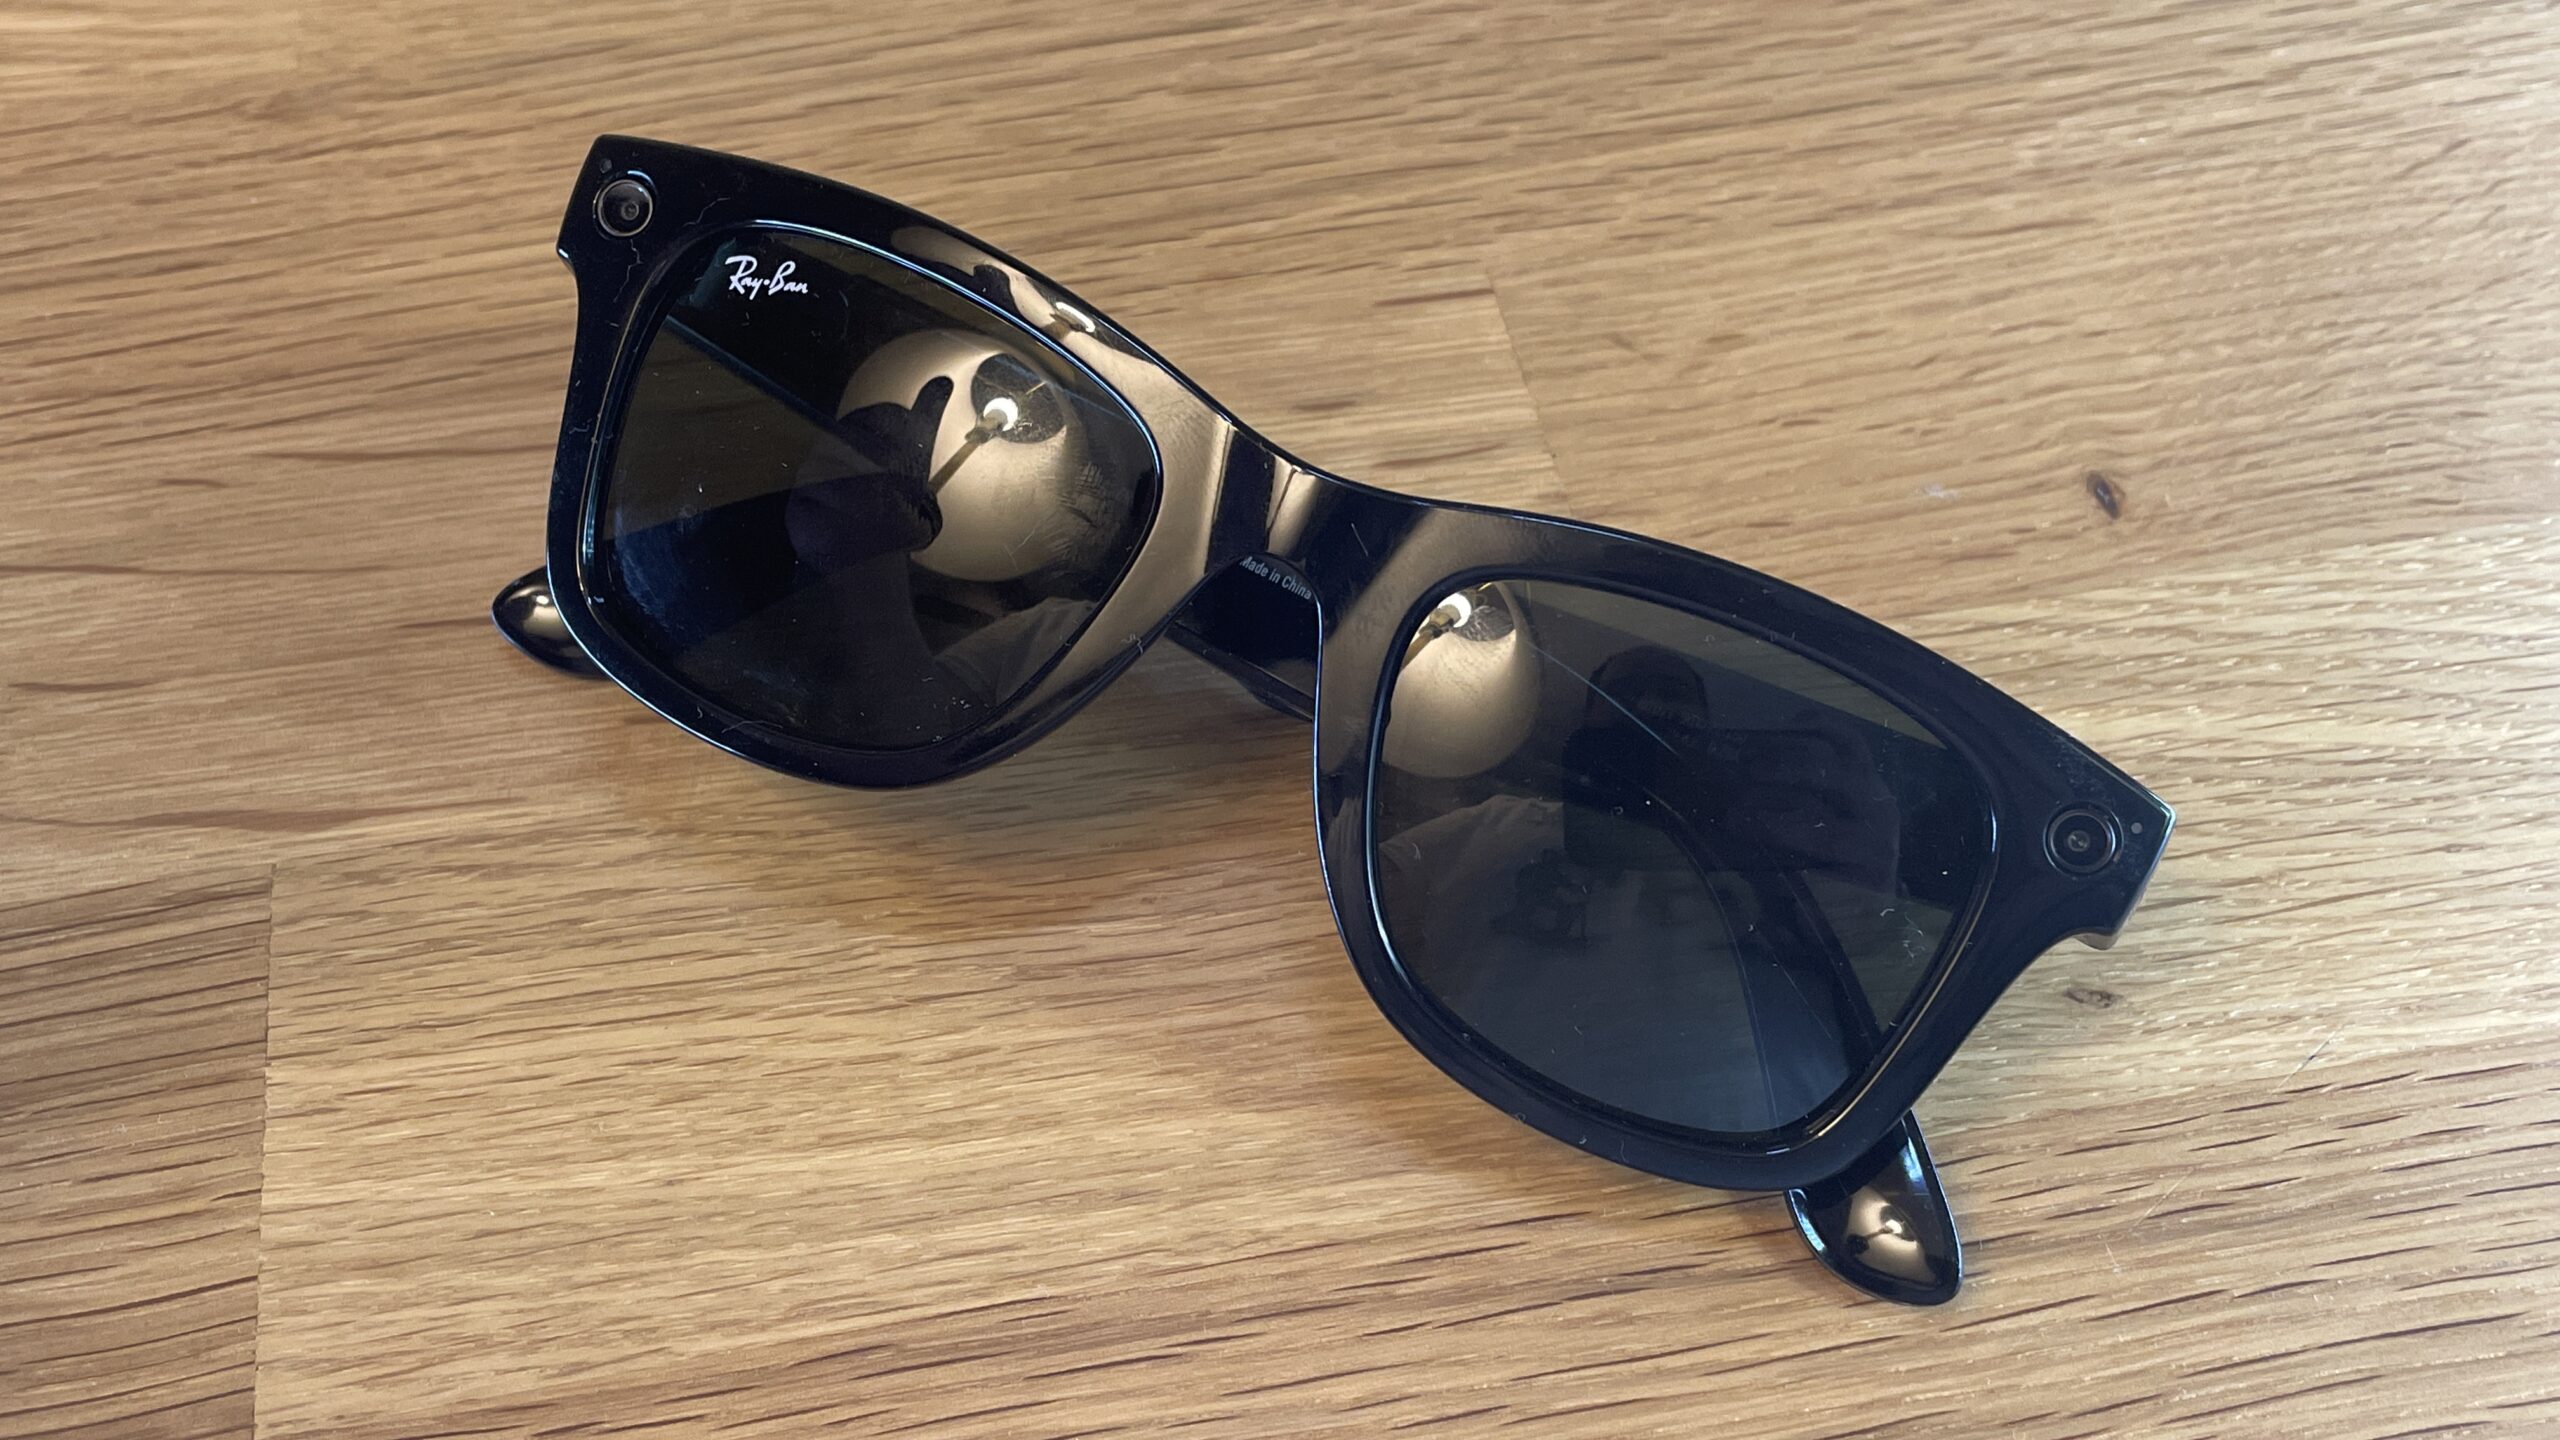 Ray-Ban Stories Smart Sunglasses Review: All-Seeing Eyes